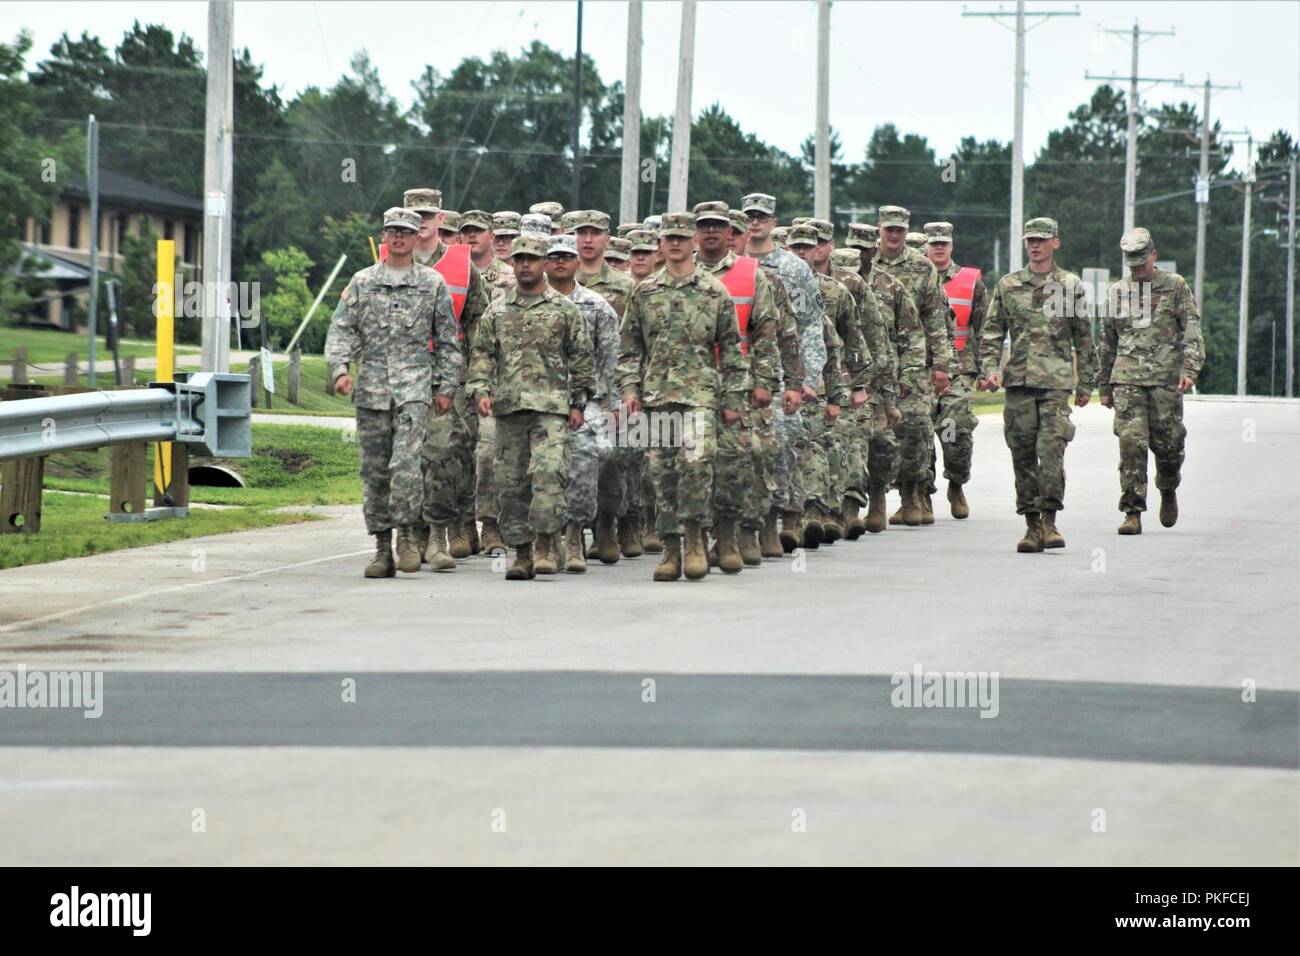 Students in the Fort McCoy Noncommissioned Officer Academy’s Basic Leader Course march along an installation roadway Aug. 3, 2018, at Fort McCoy, Wis. The students were returning to their campus after completing their lunch meal at the dining facility in building 50. The NCO Academy was activated at Fort McCoy in 1988. The academy is one of the largest tenant organizations at the installation providing institutional training with more than 1,800 students attending annually for the Battle Staff Noncommissioned Officer Course and BLC. Stock Photo